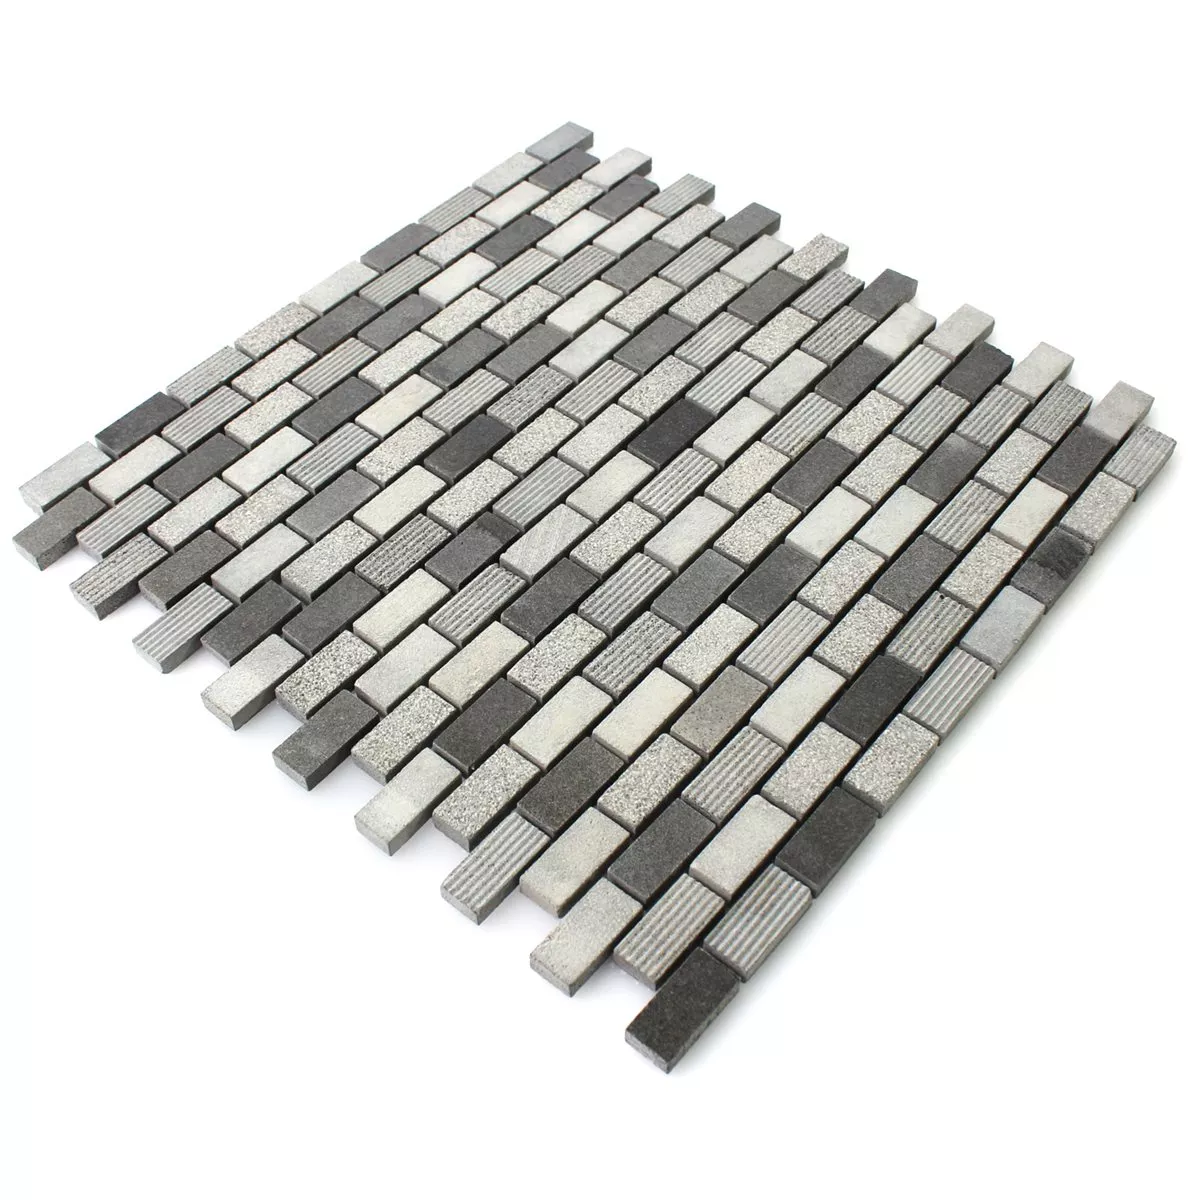 Mosaic Tiles Natural Stone Notte Anthracite 15x30x8mm